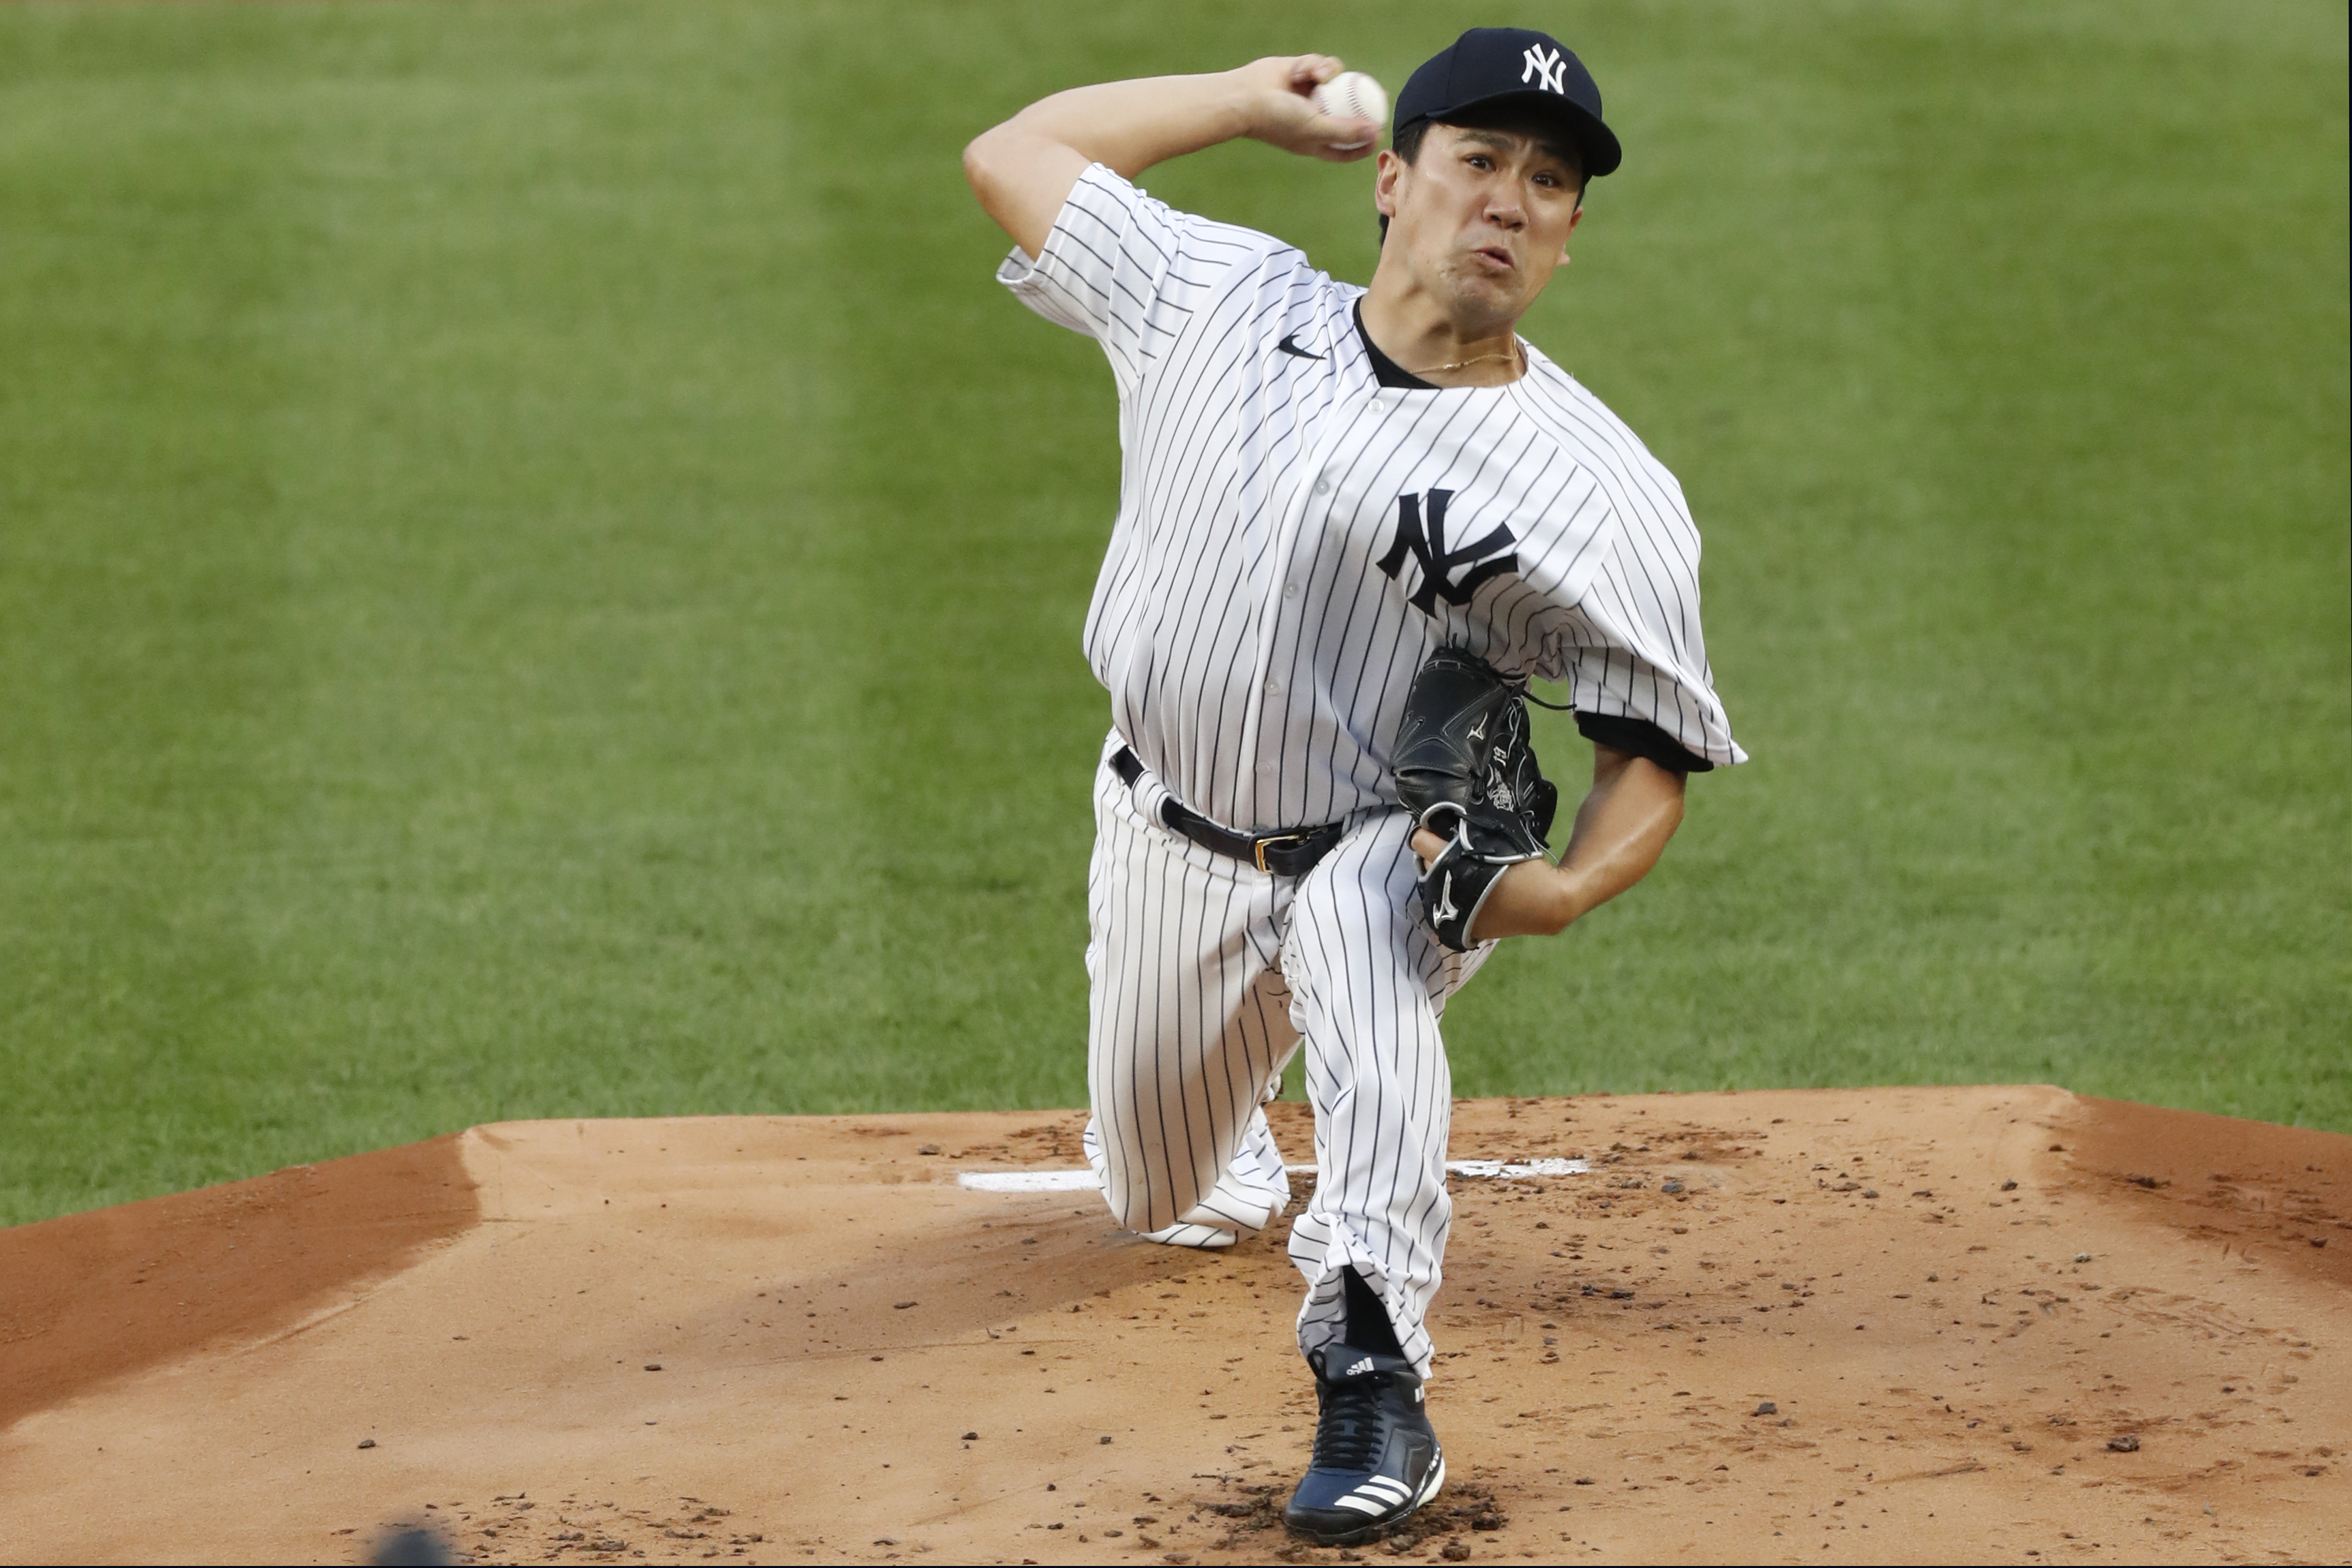 Pitcher Masahiro Tanaka posted by Japanese team, free to join MLB